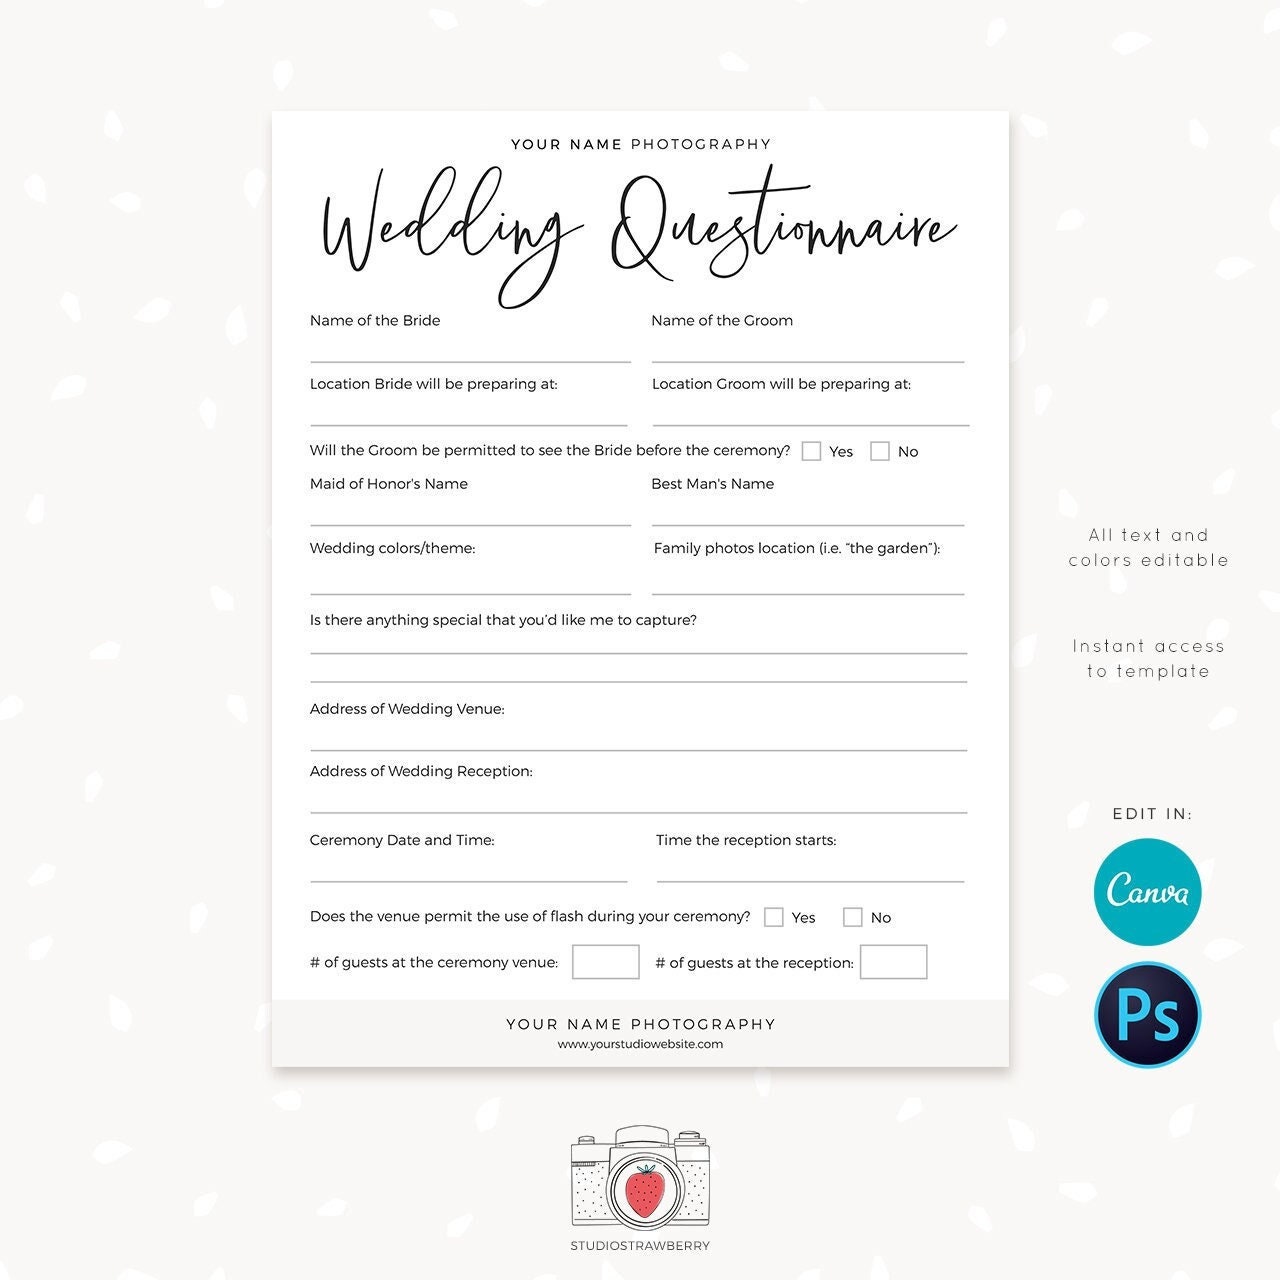 photography-questionnaire-template-wedding-photography-etsy